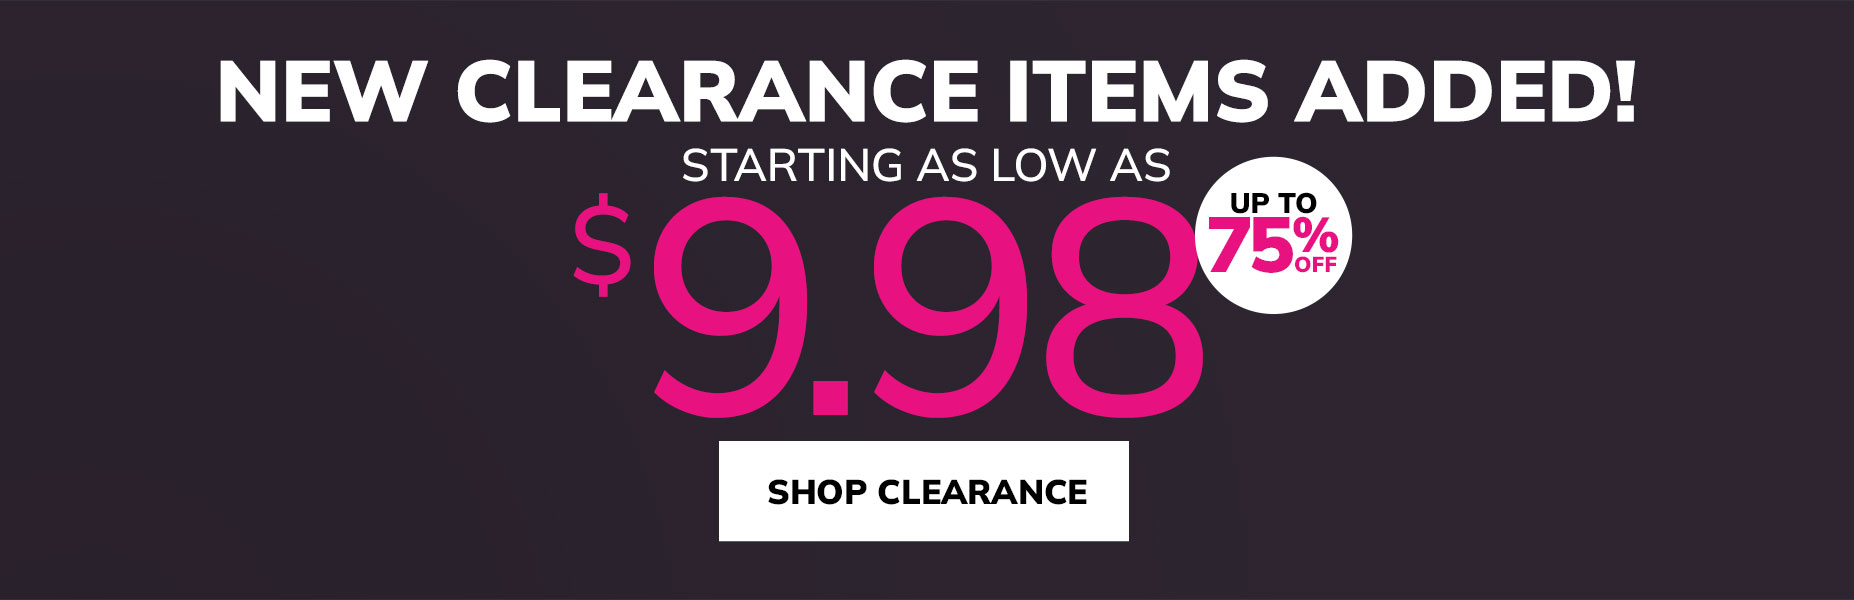 new clearance items added upto 75% off